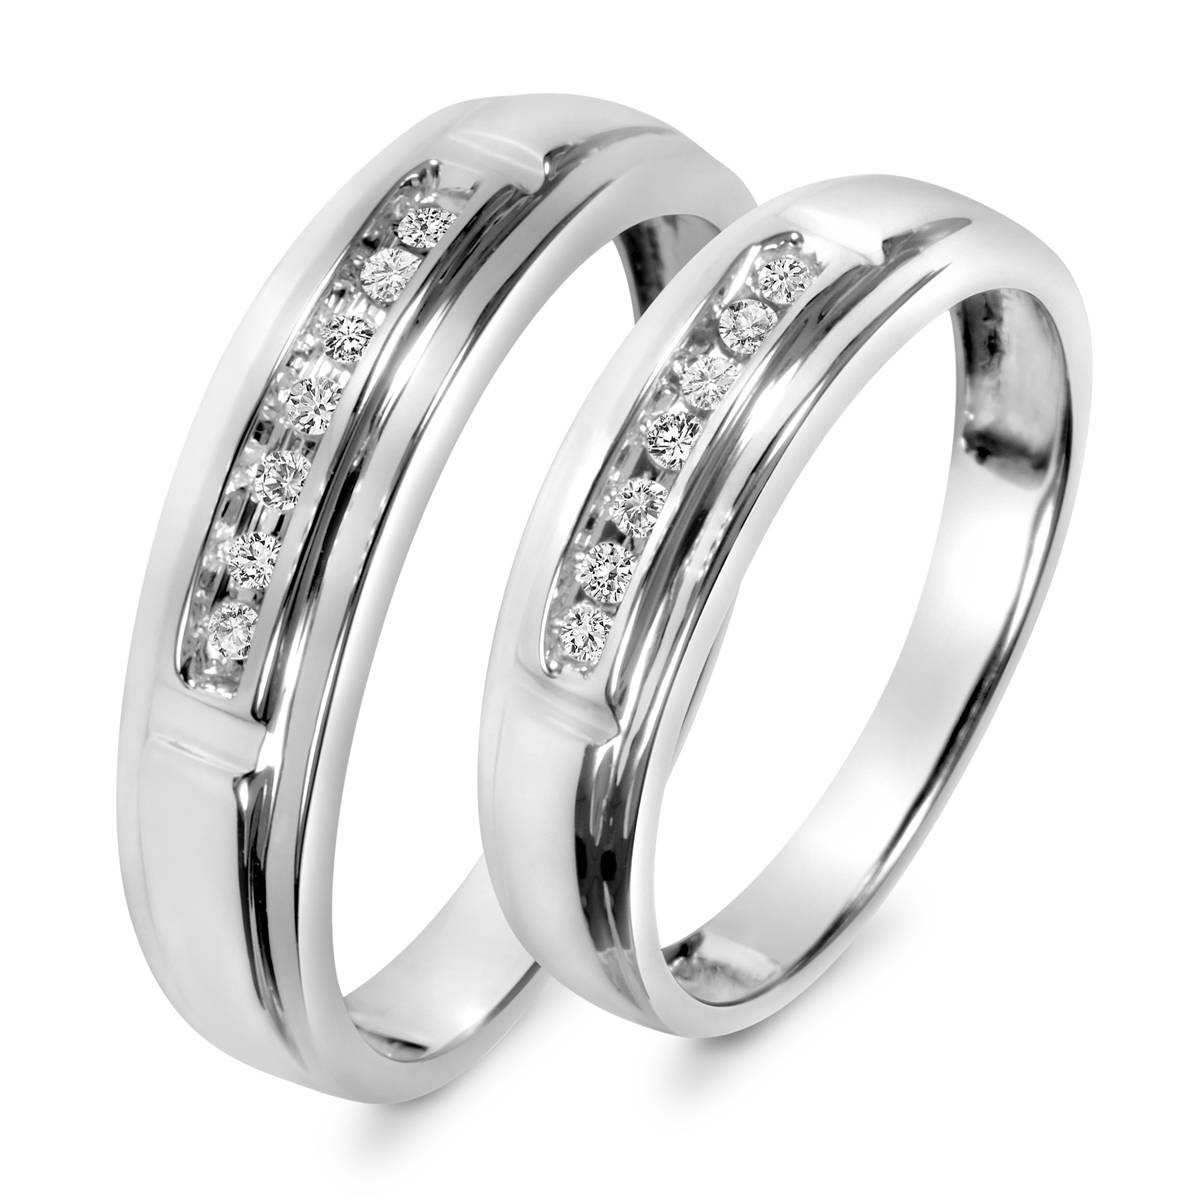 Wedding Band Sets For Her Luxury 15 Inspirations Of Matching Wedding Bands Sets For His And Her Of Wedding Band Sets For Her 